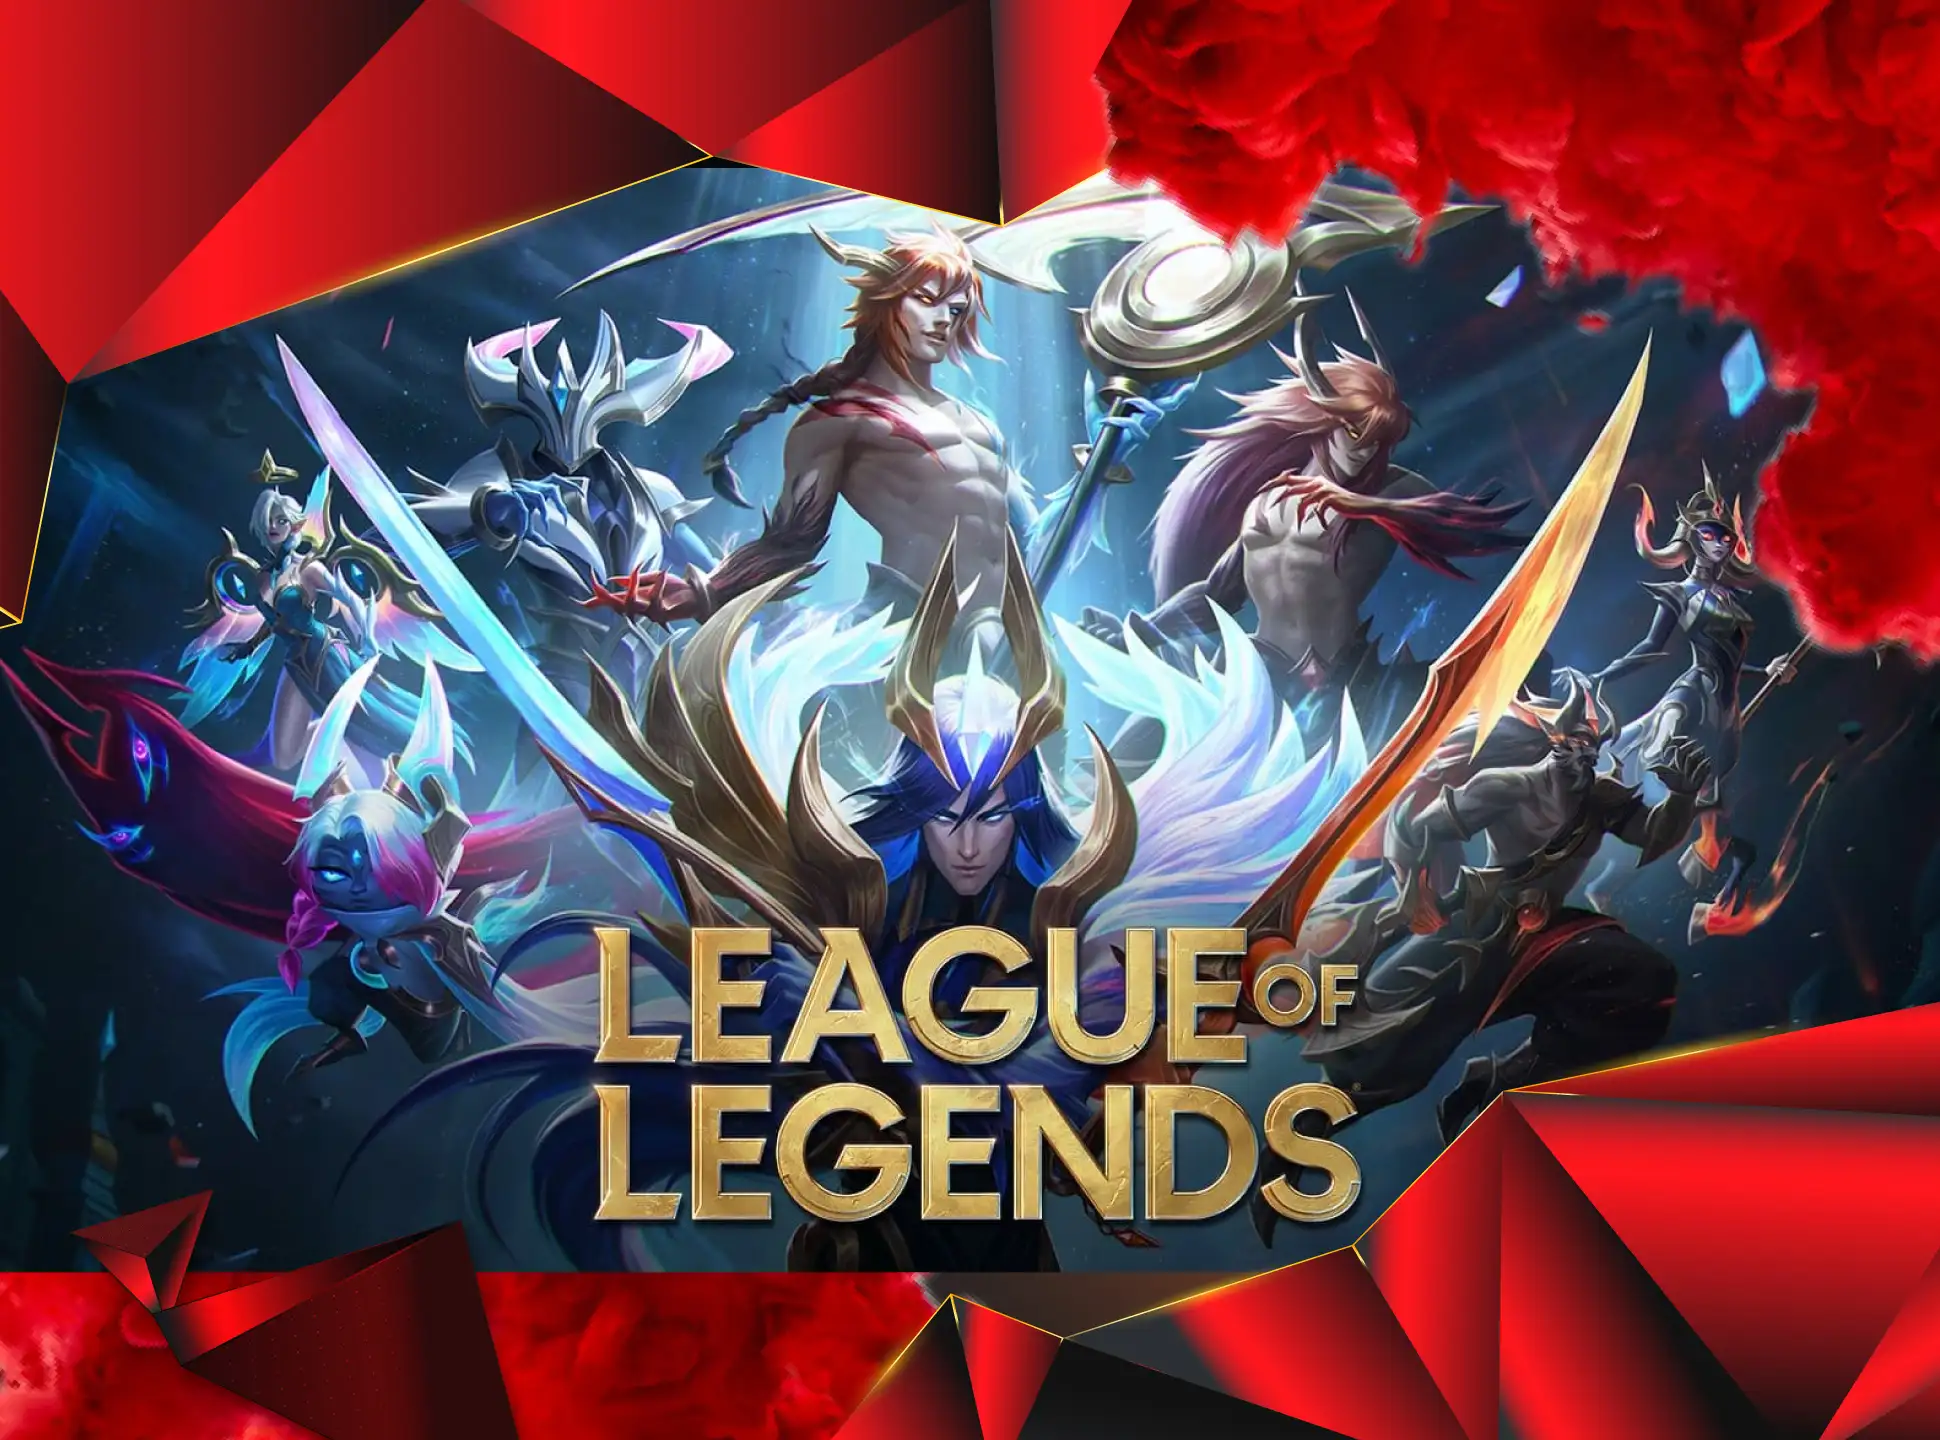 Watch the LOL championships and bet on their results at MarvelBet.